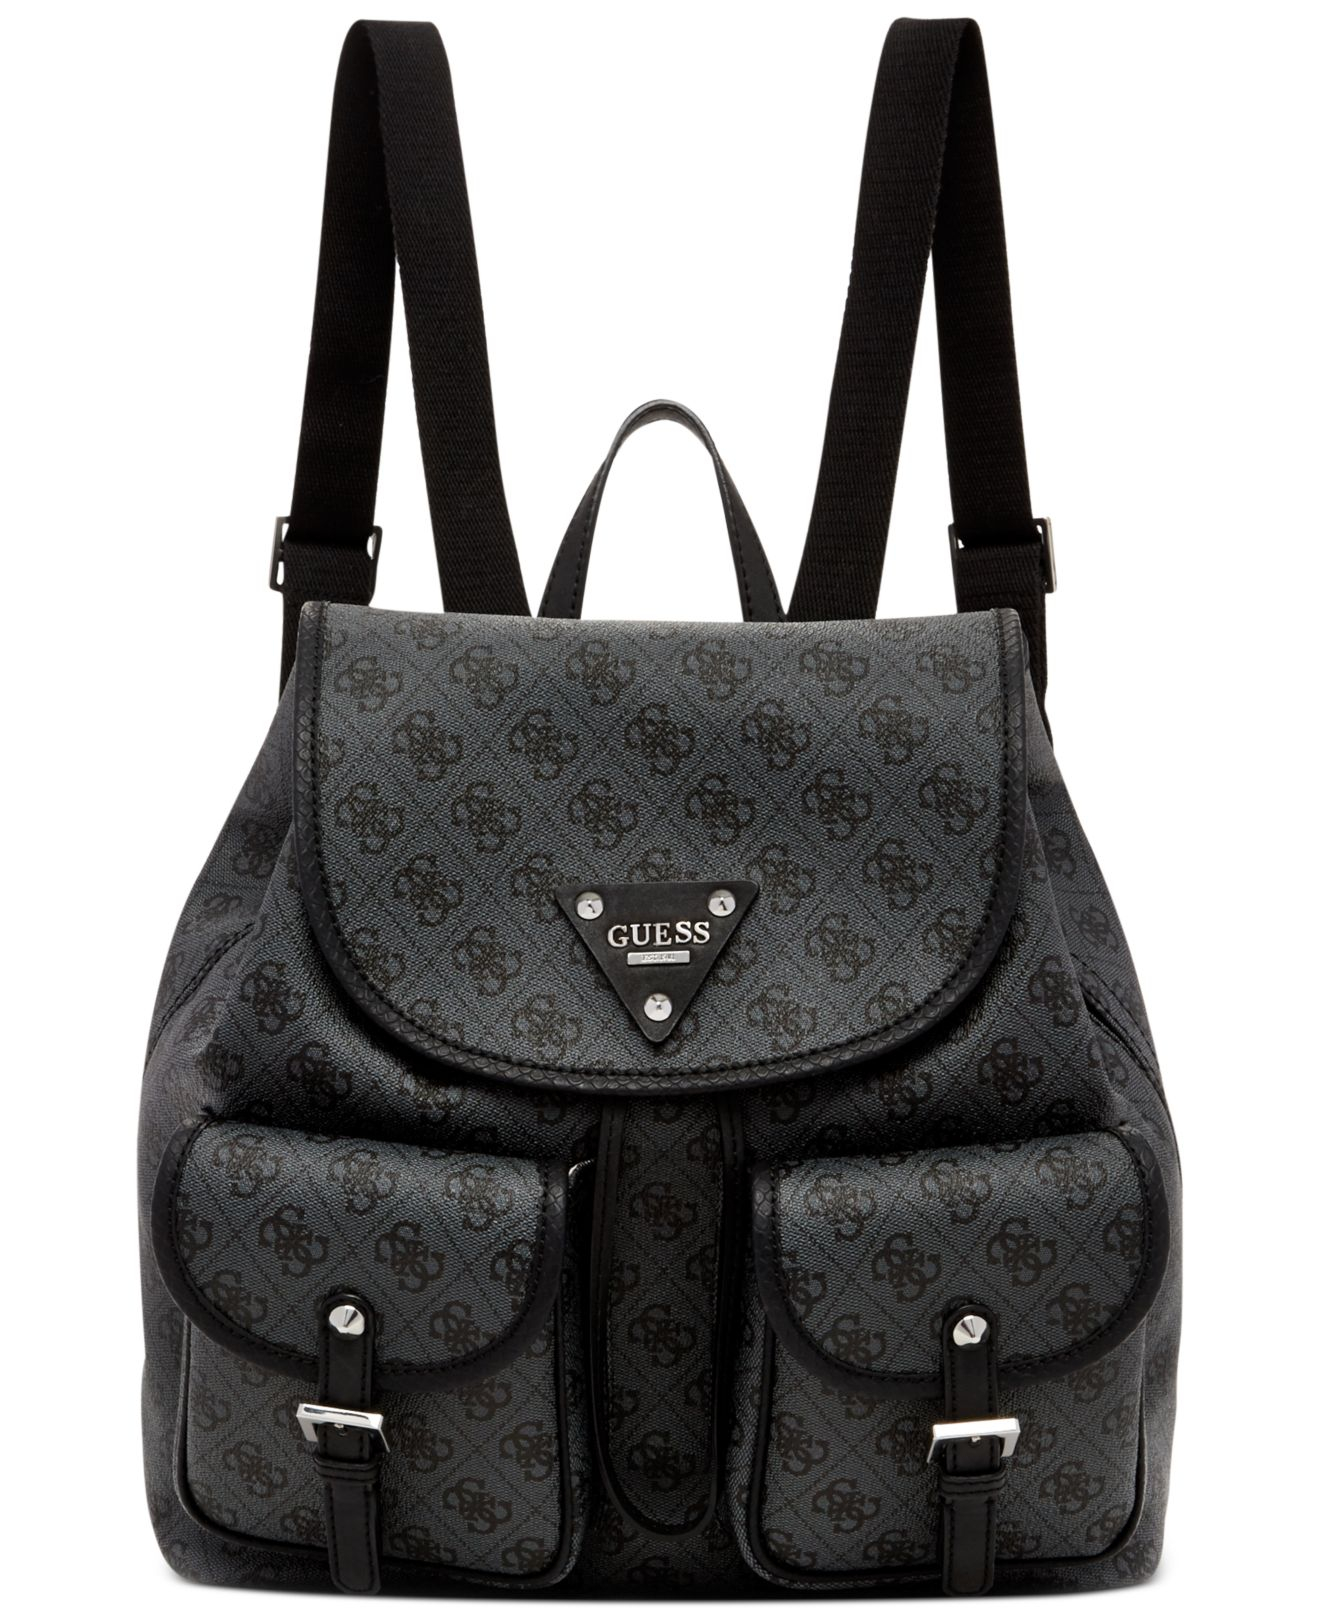 Guess Cheatin Heart Backpack in Gray - Lyst